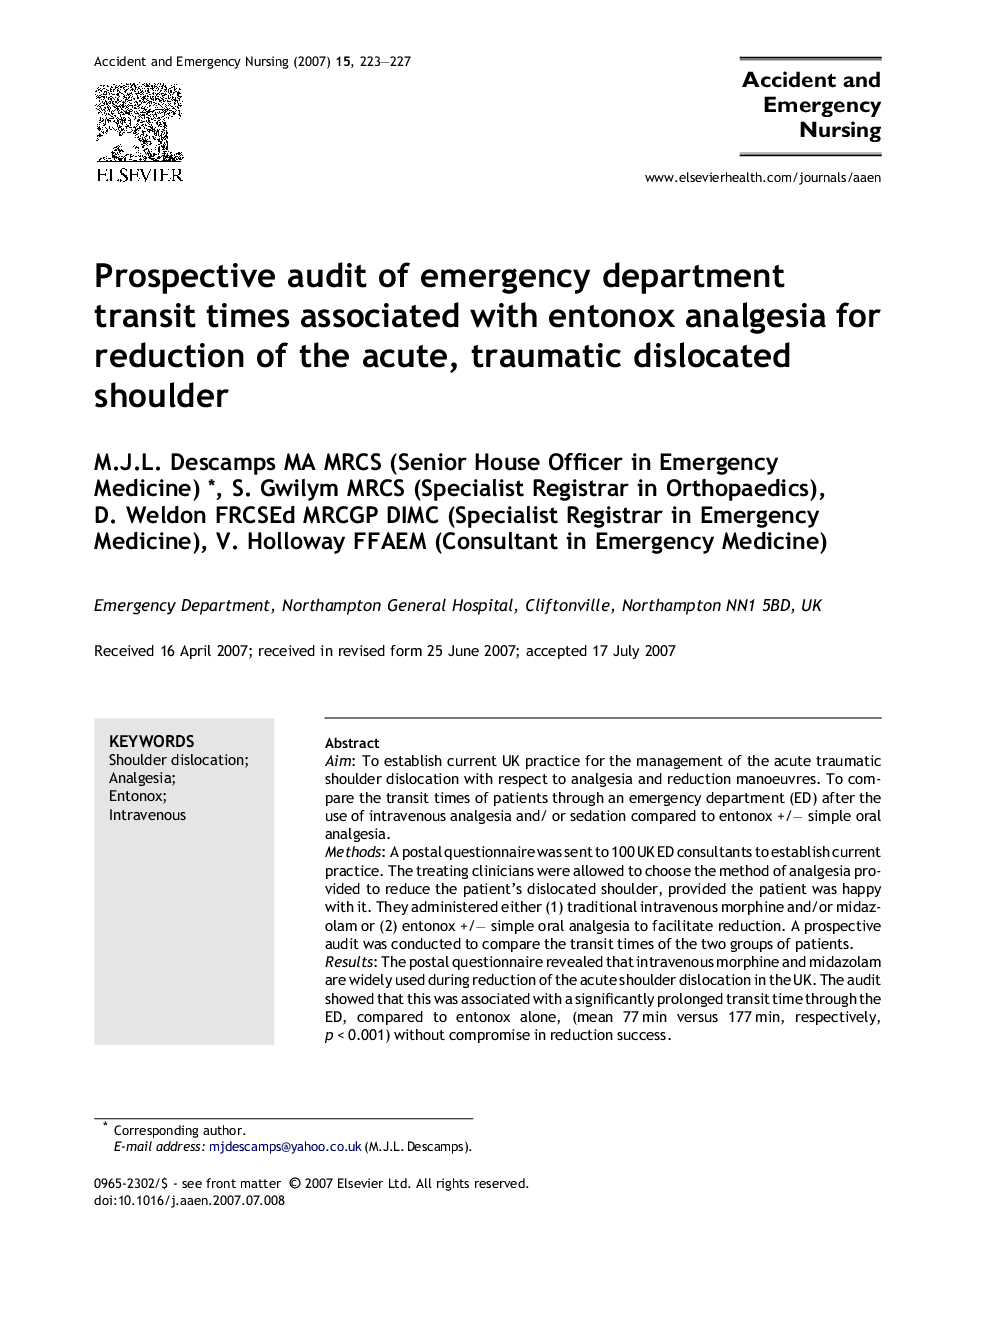 Prospective audit of emergency department transit times associated with entonox analgesia for reduction of the acute, traumatic dislocated shoulder